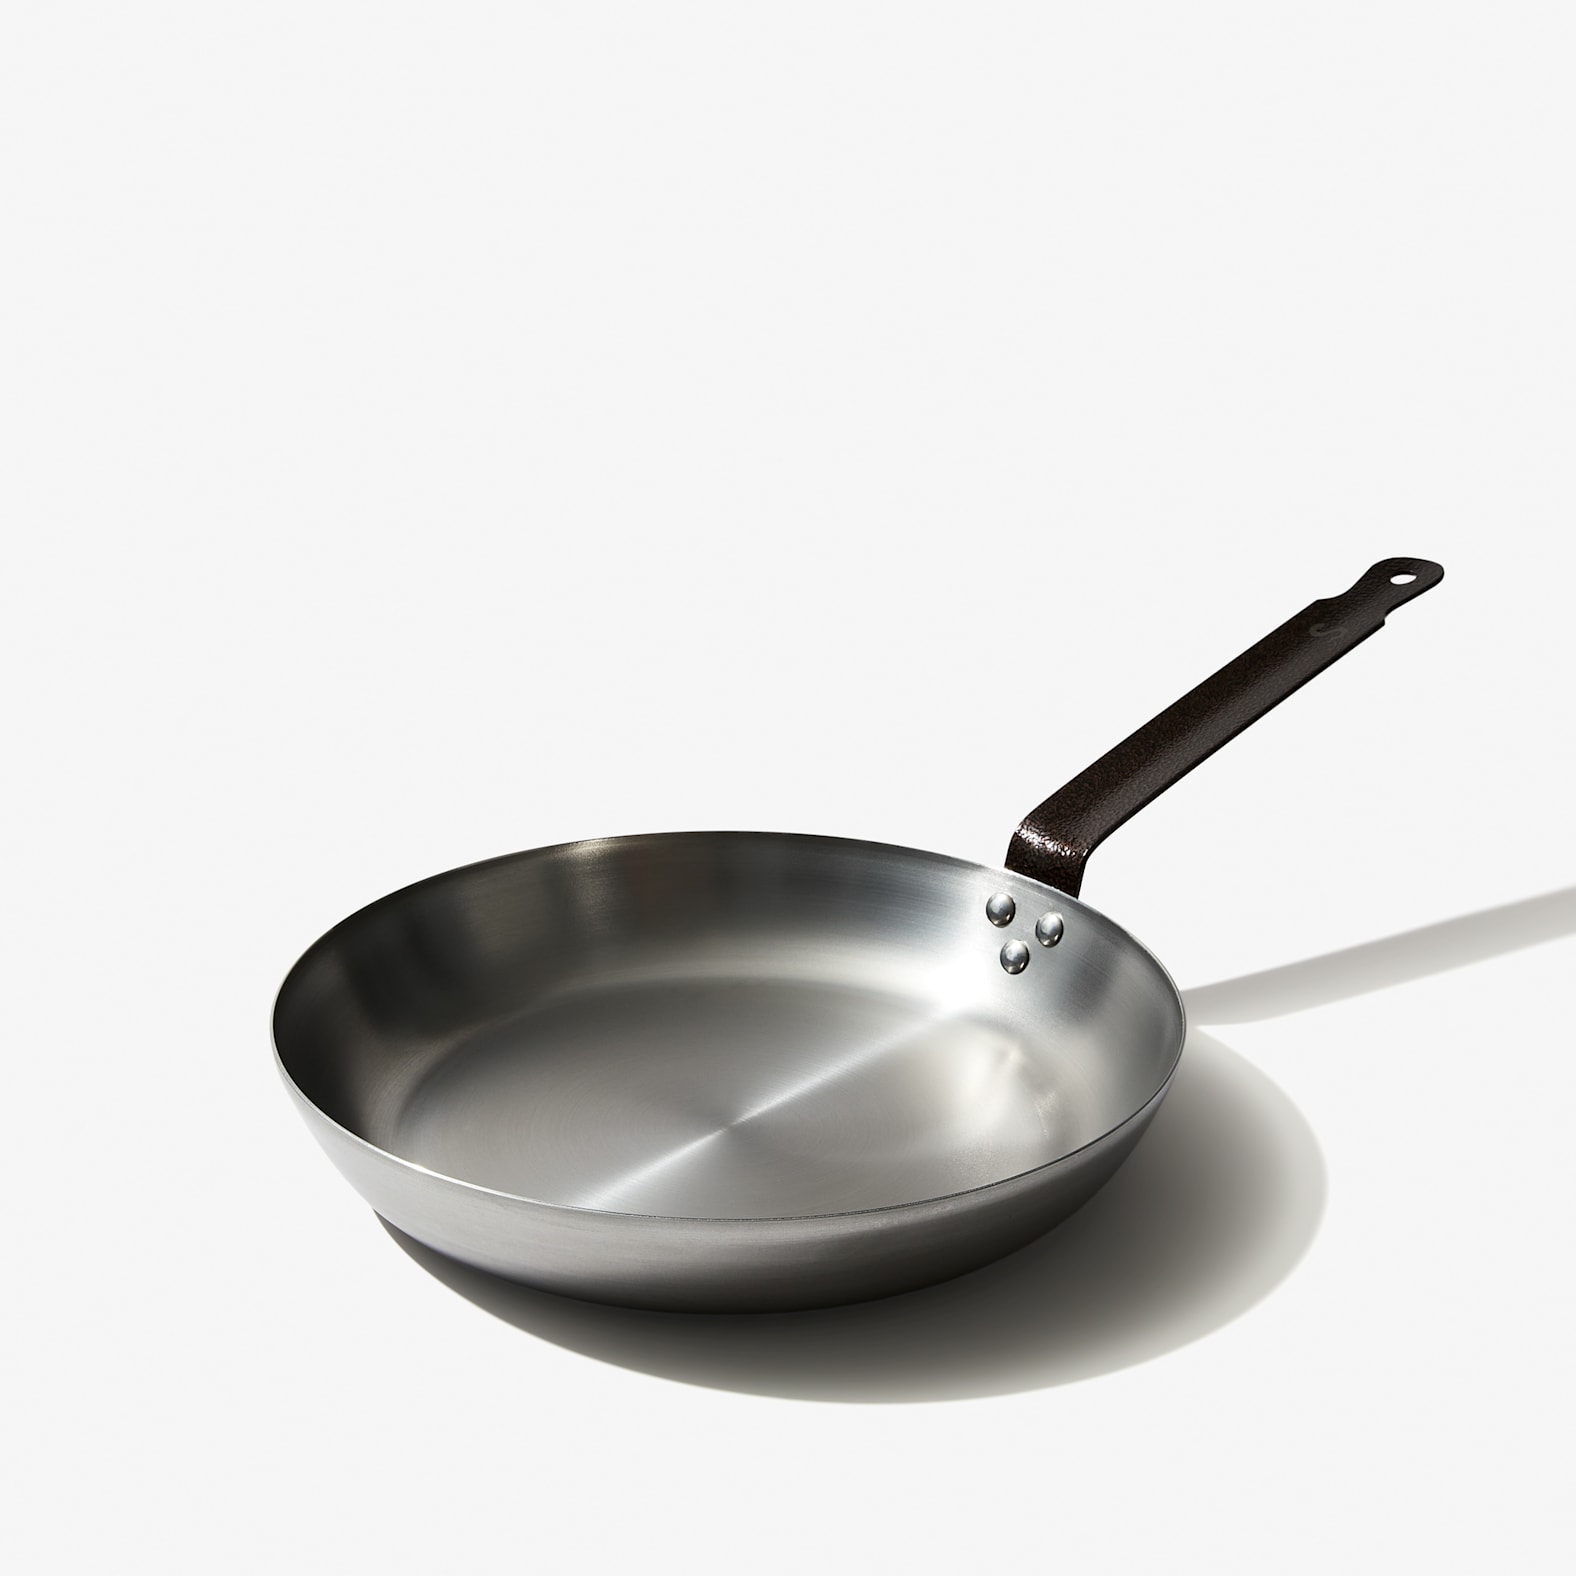 Sardel Review: Cookware Made in Italy